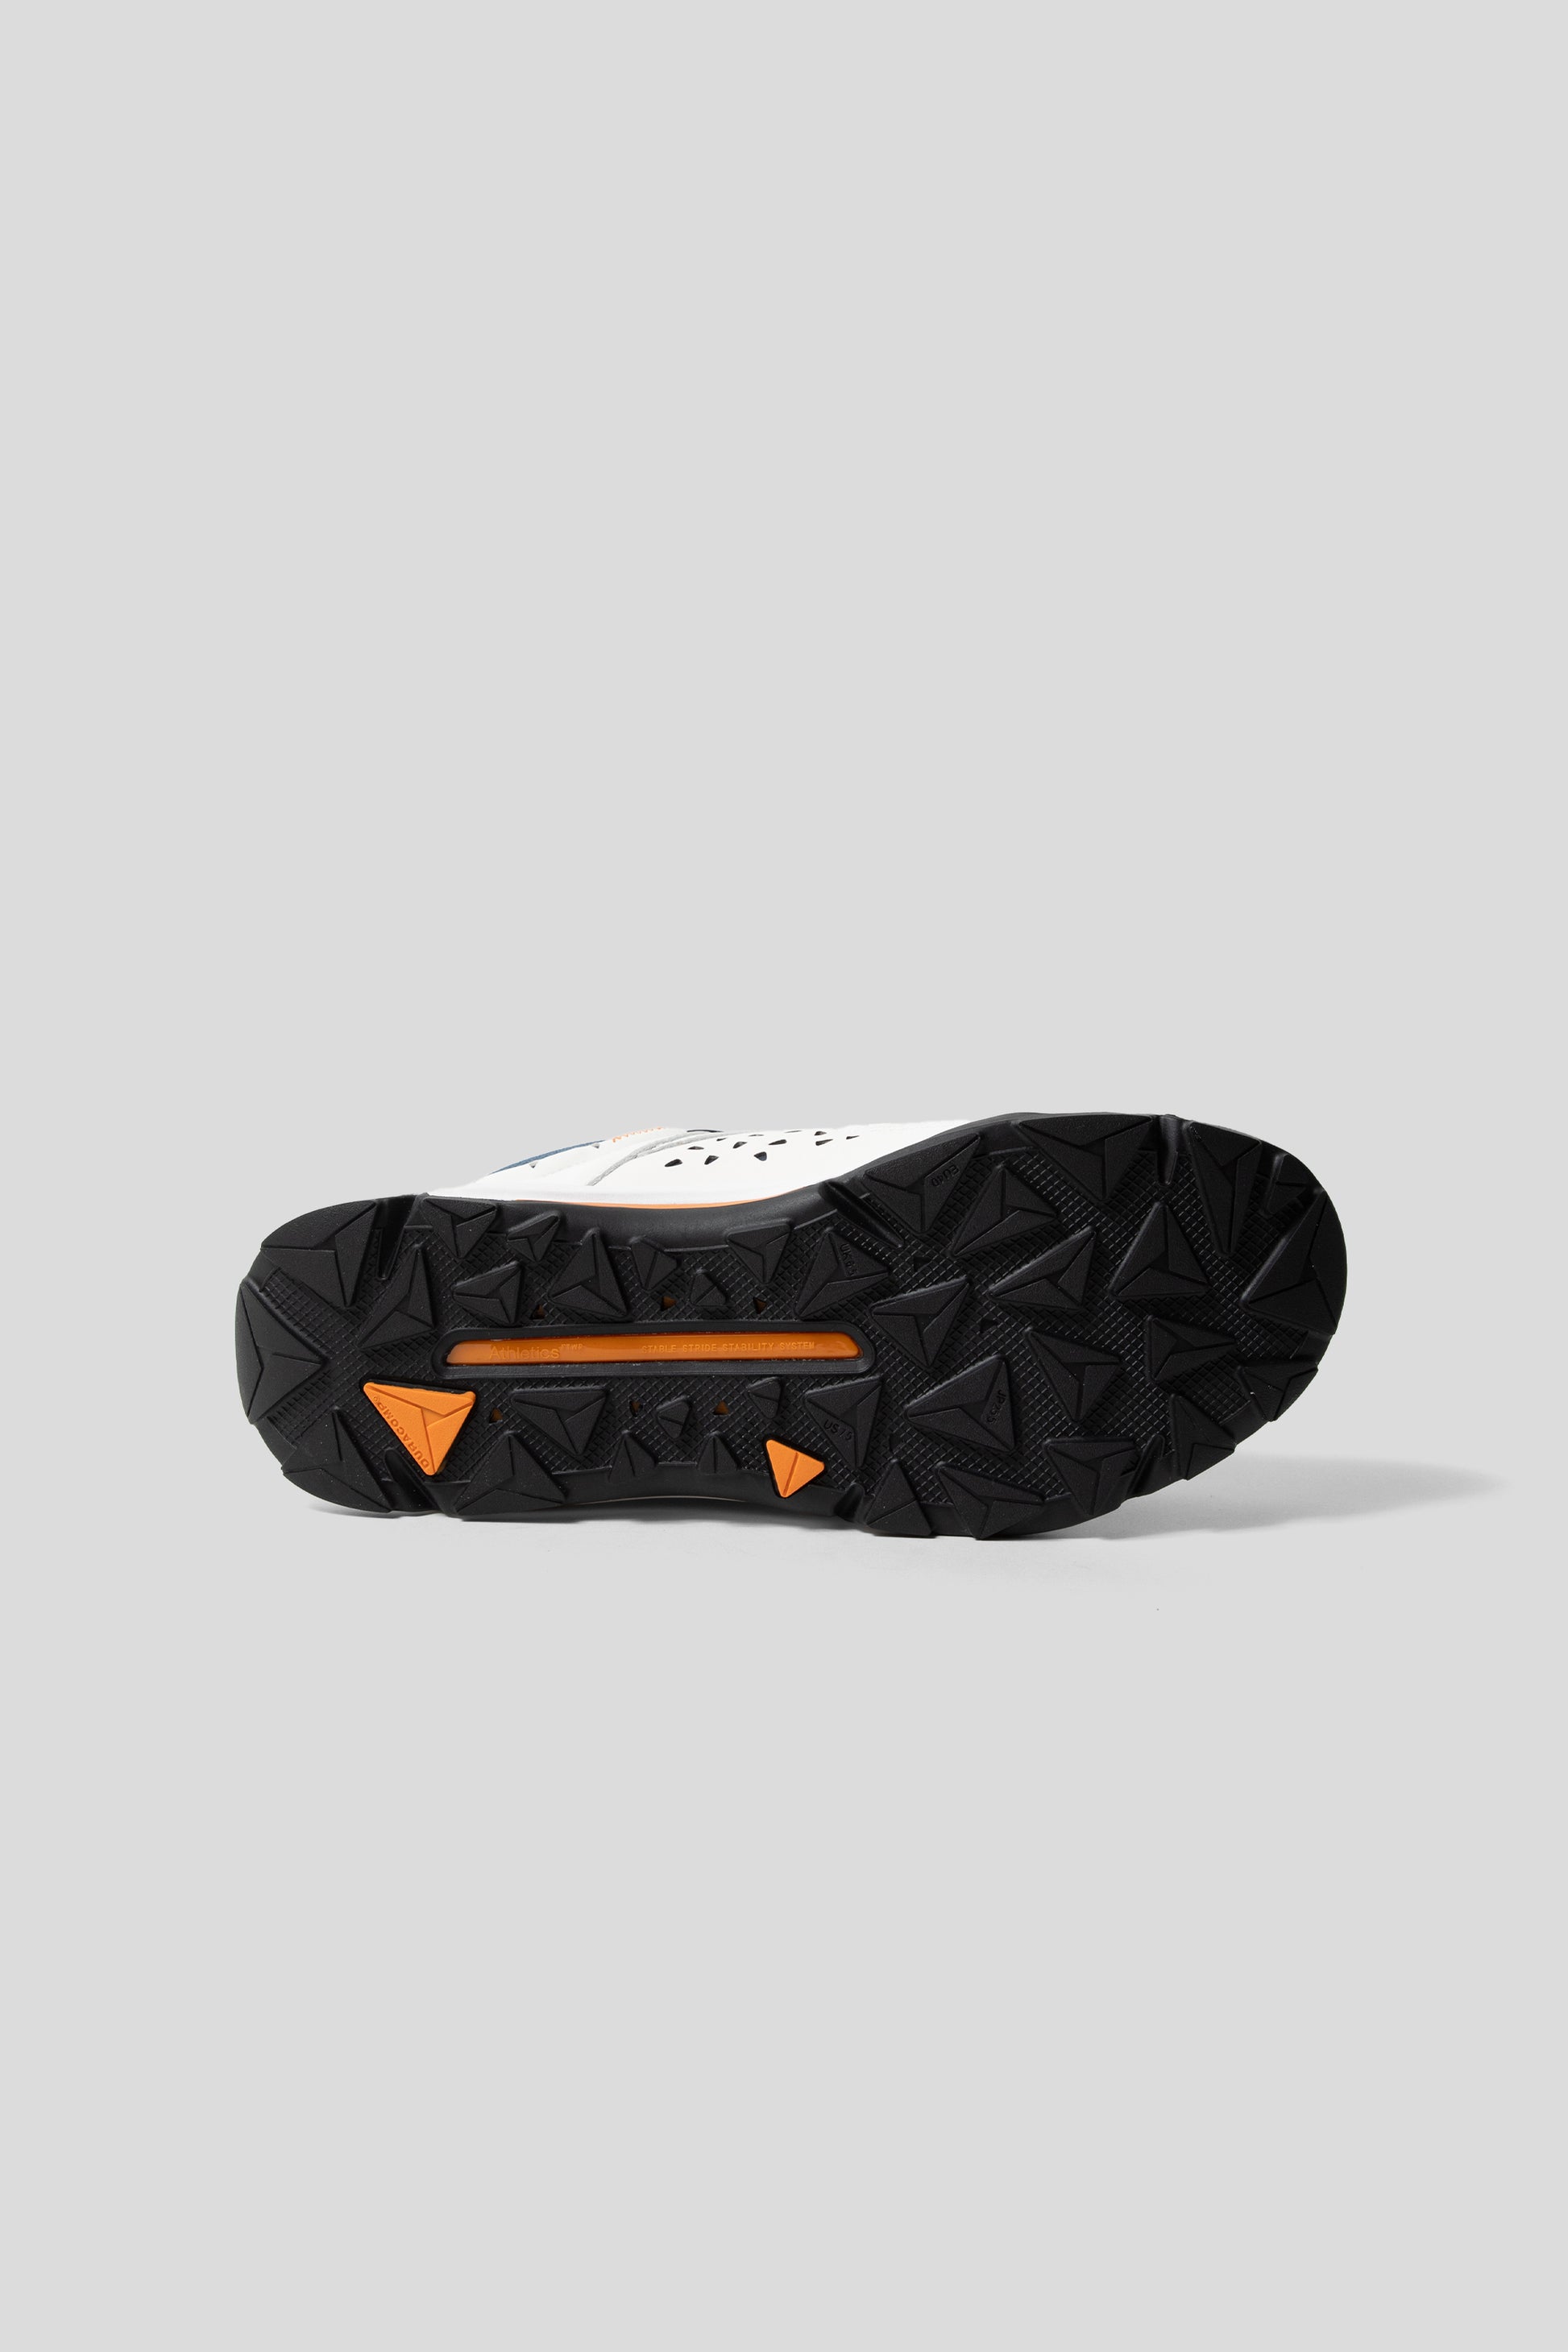 Athletics FTWR VTWO MID in the Cloud White and Orange Pepper colourway.